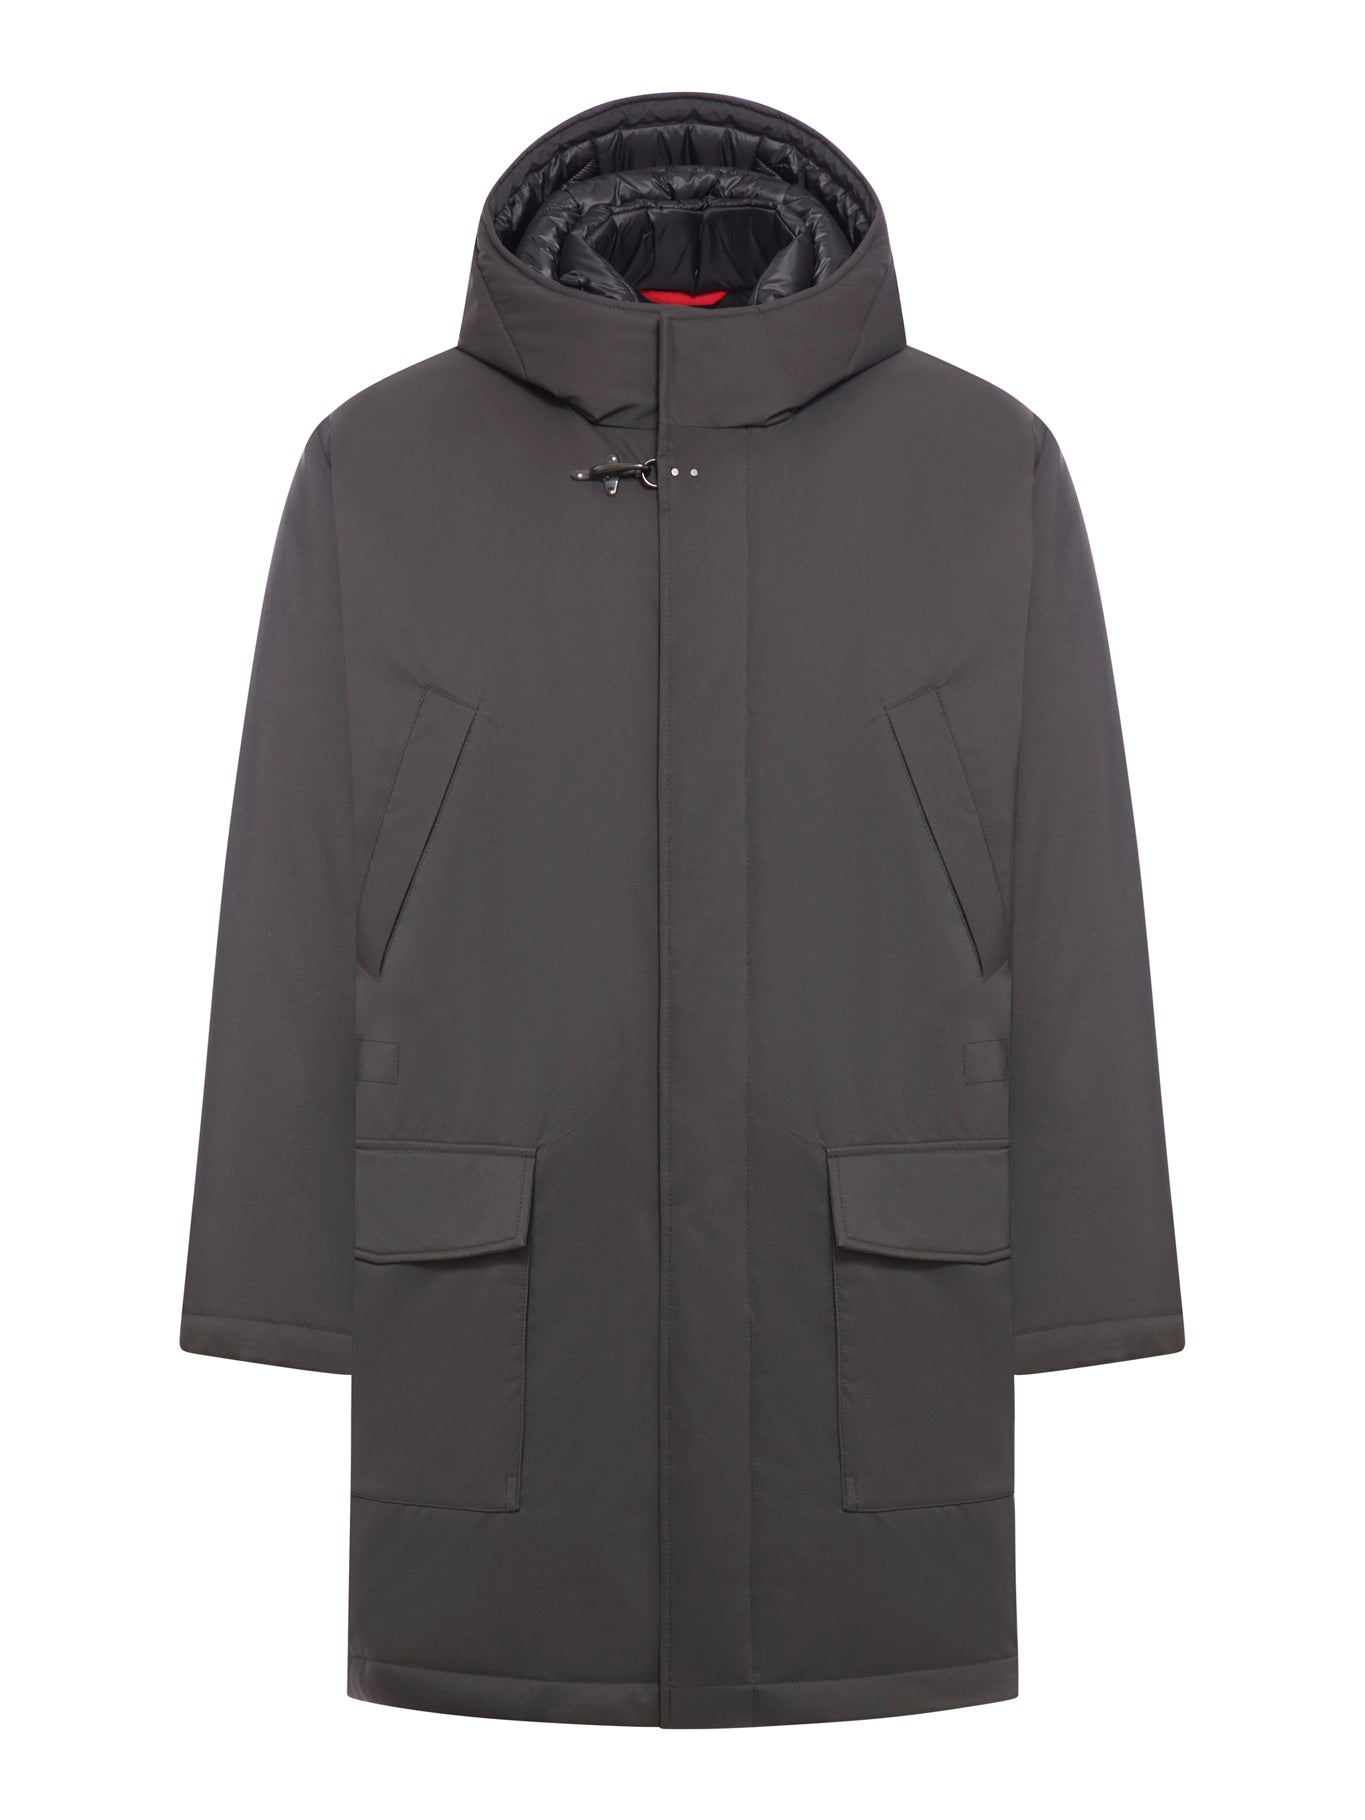 LONG JACKET IN TECHNICAL FABRIC